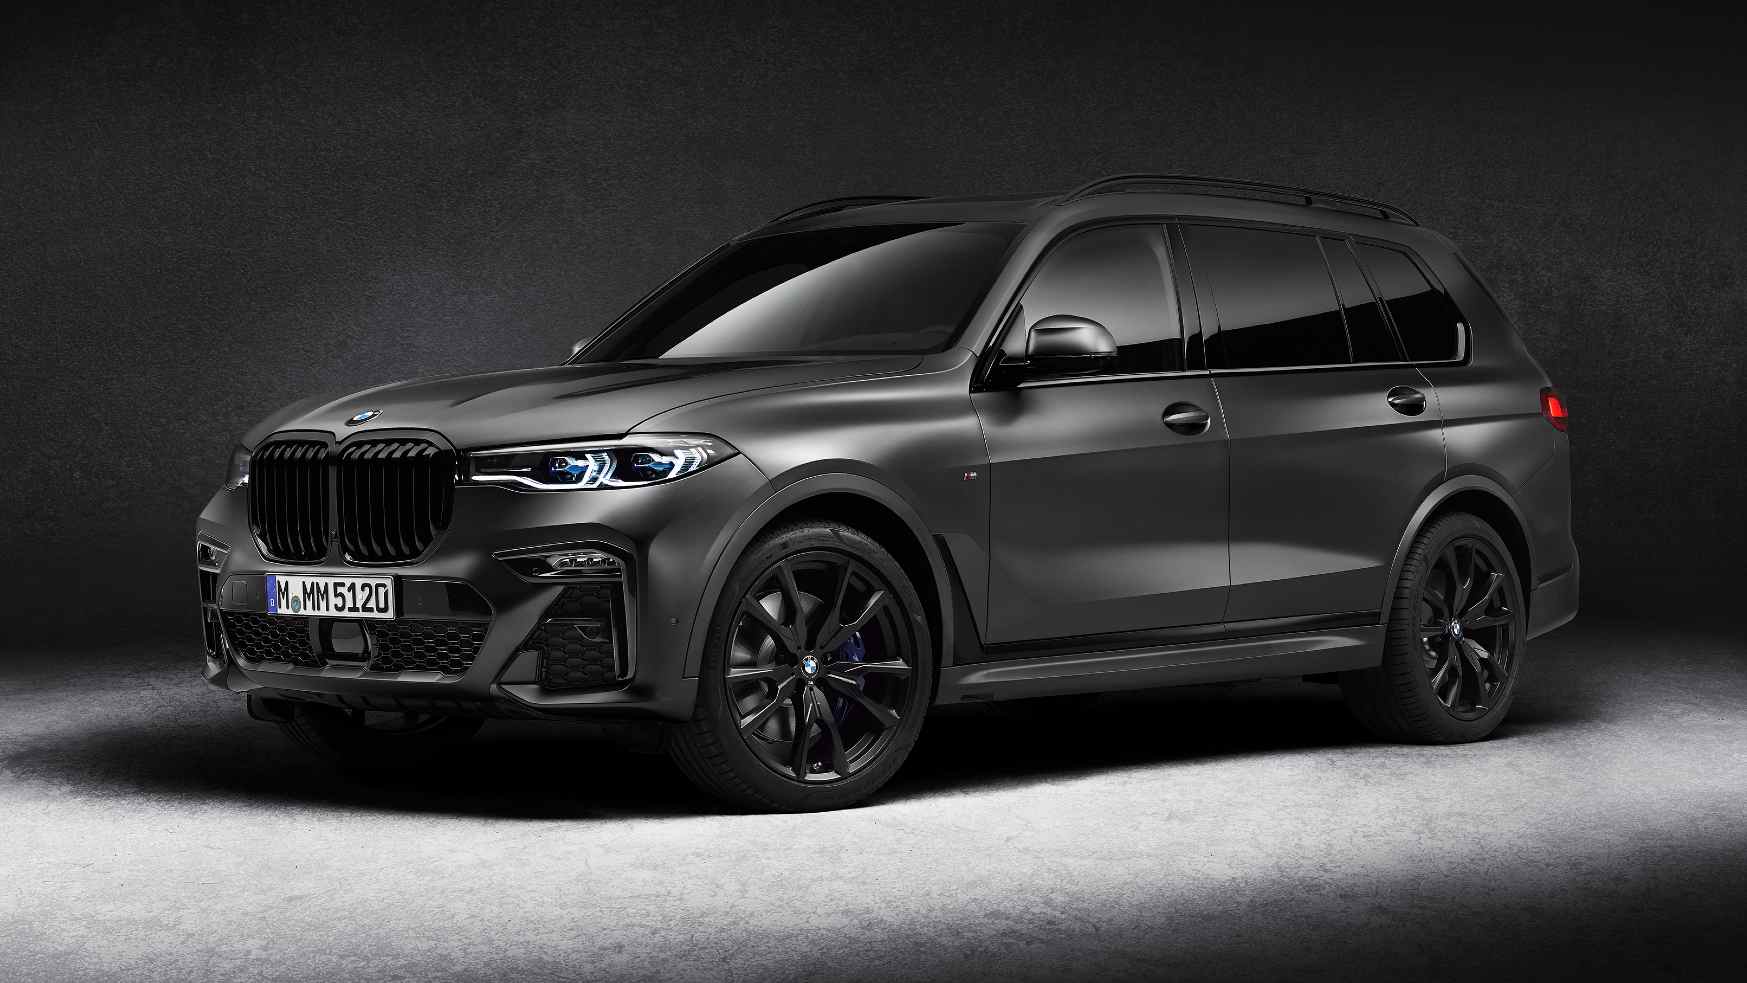 The X7 Dark Shadow edition is the first BMW SUV to sport the Frozen Arctic Grey metallic paint job. Image: BMW